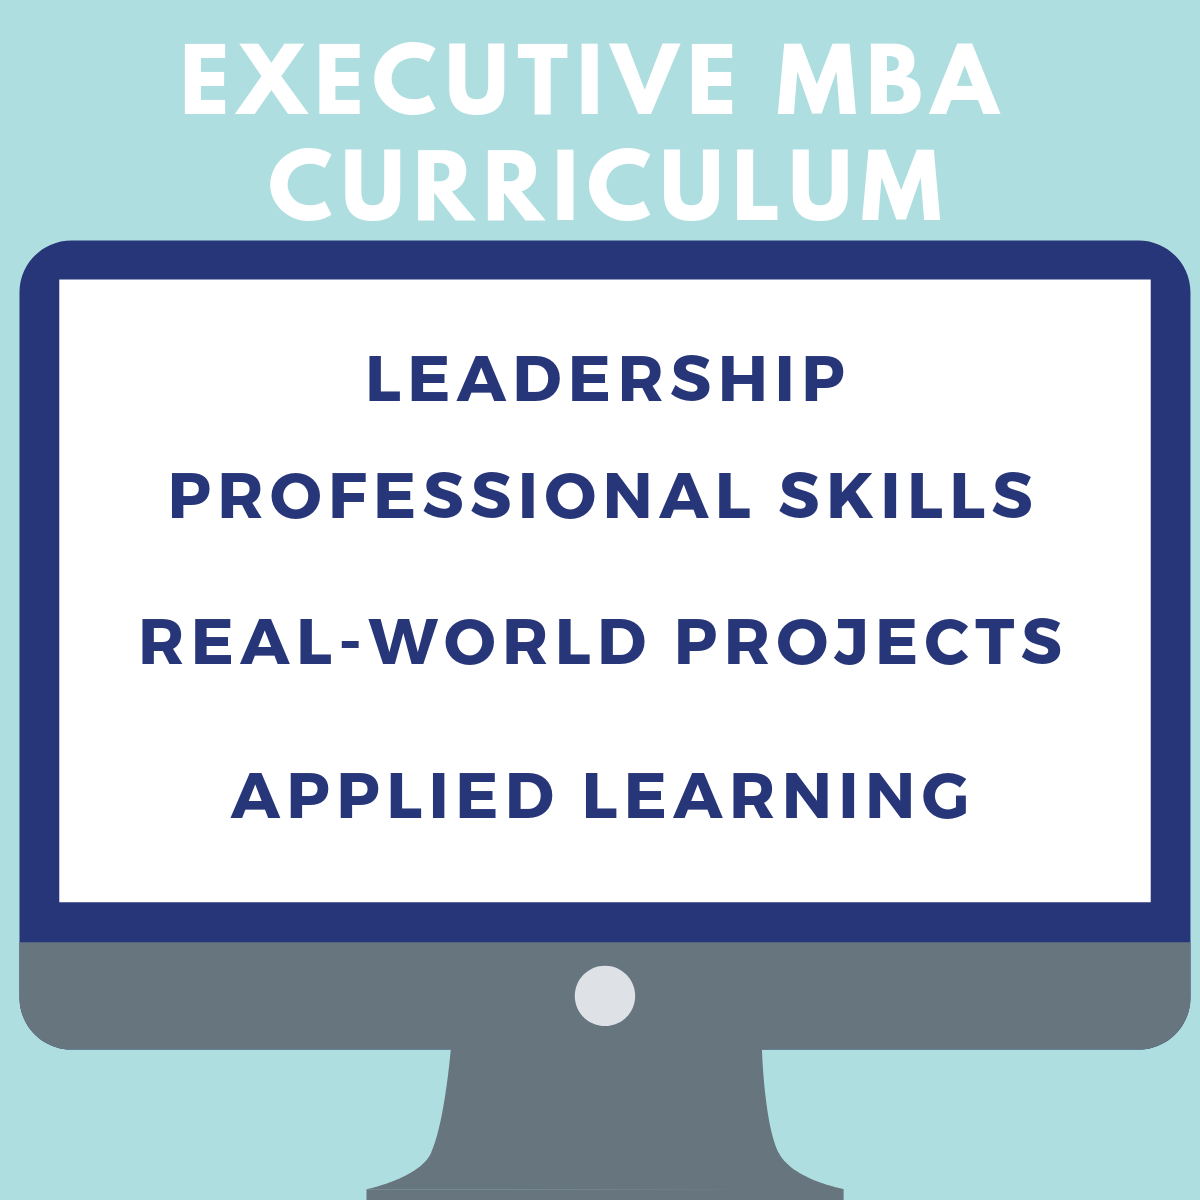 Executive MBA Curriculum: Leadership, professional skills, real-world projects, applied learning